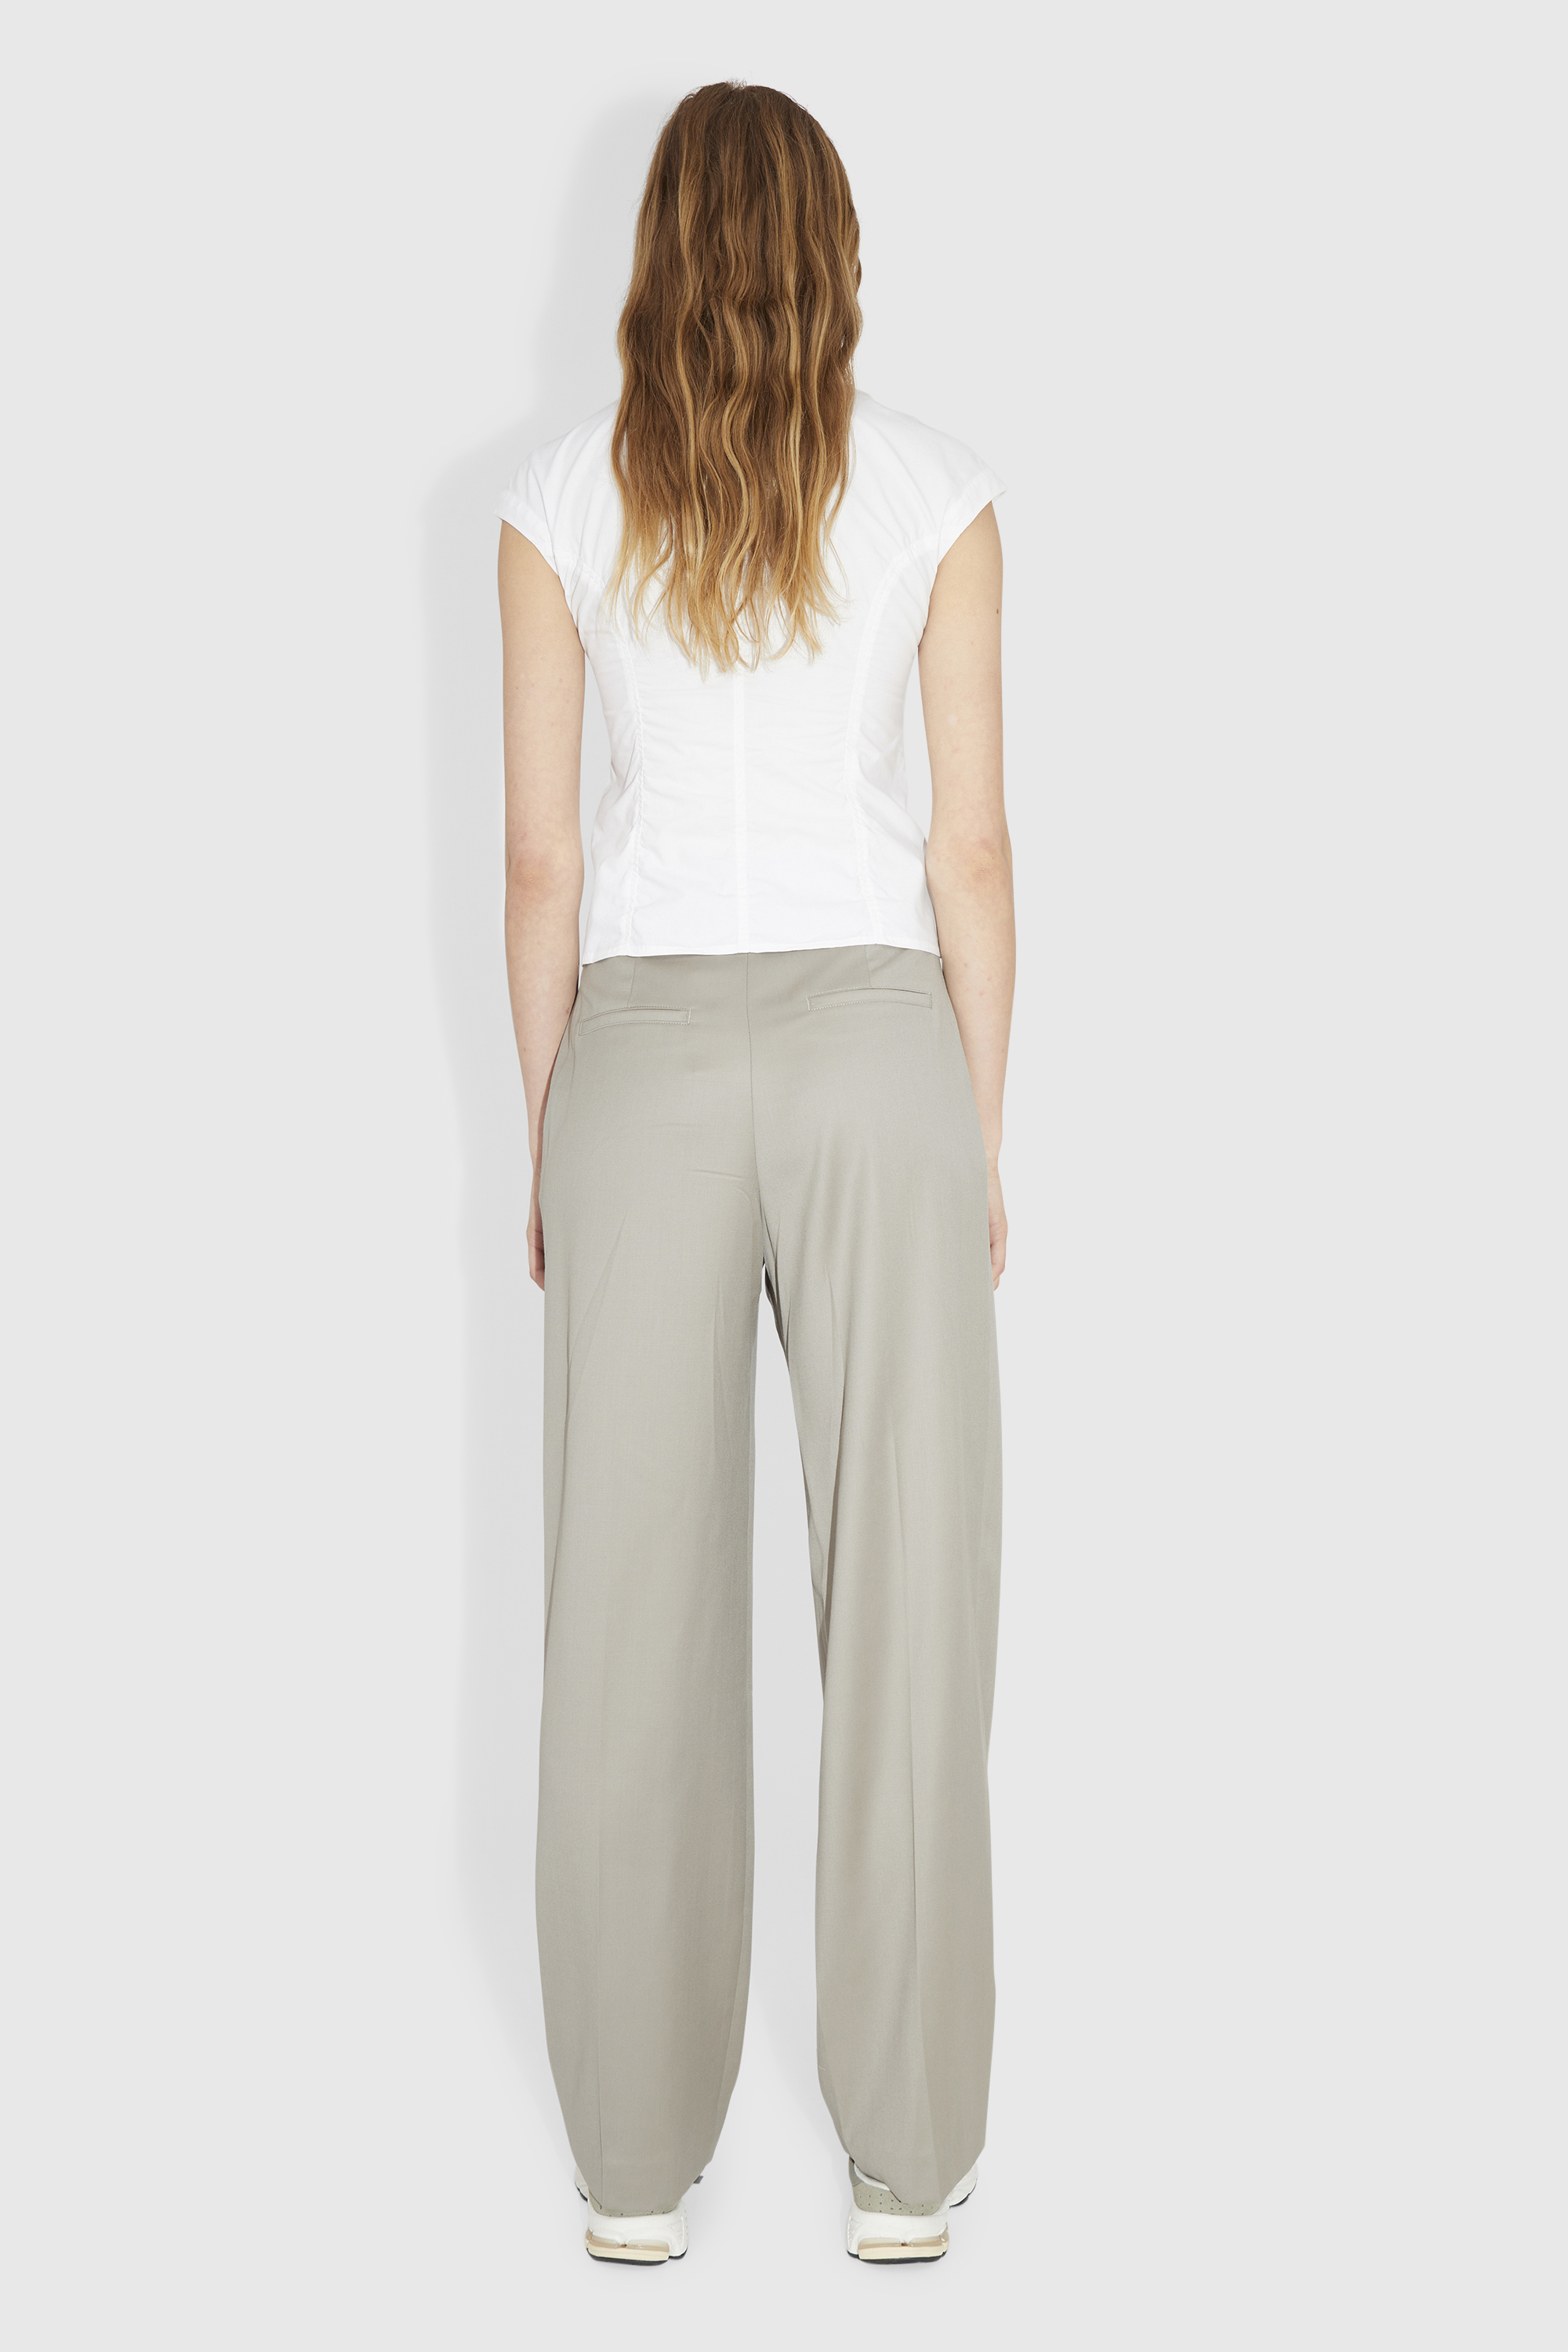 LOW CLASSIC Beige Loose Fit Trousers Low Classic